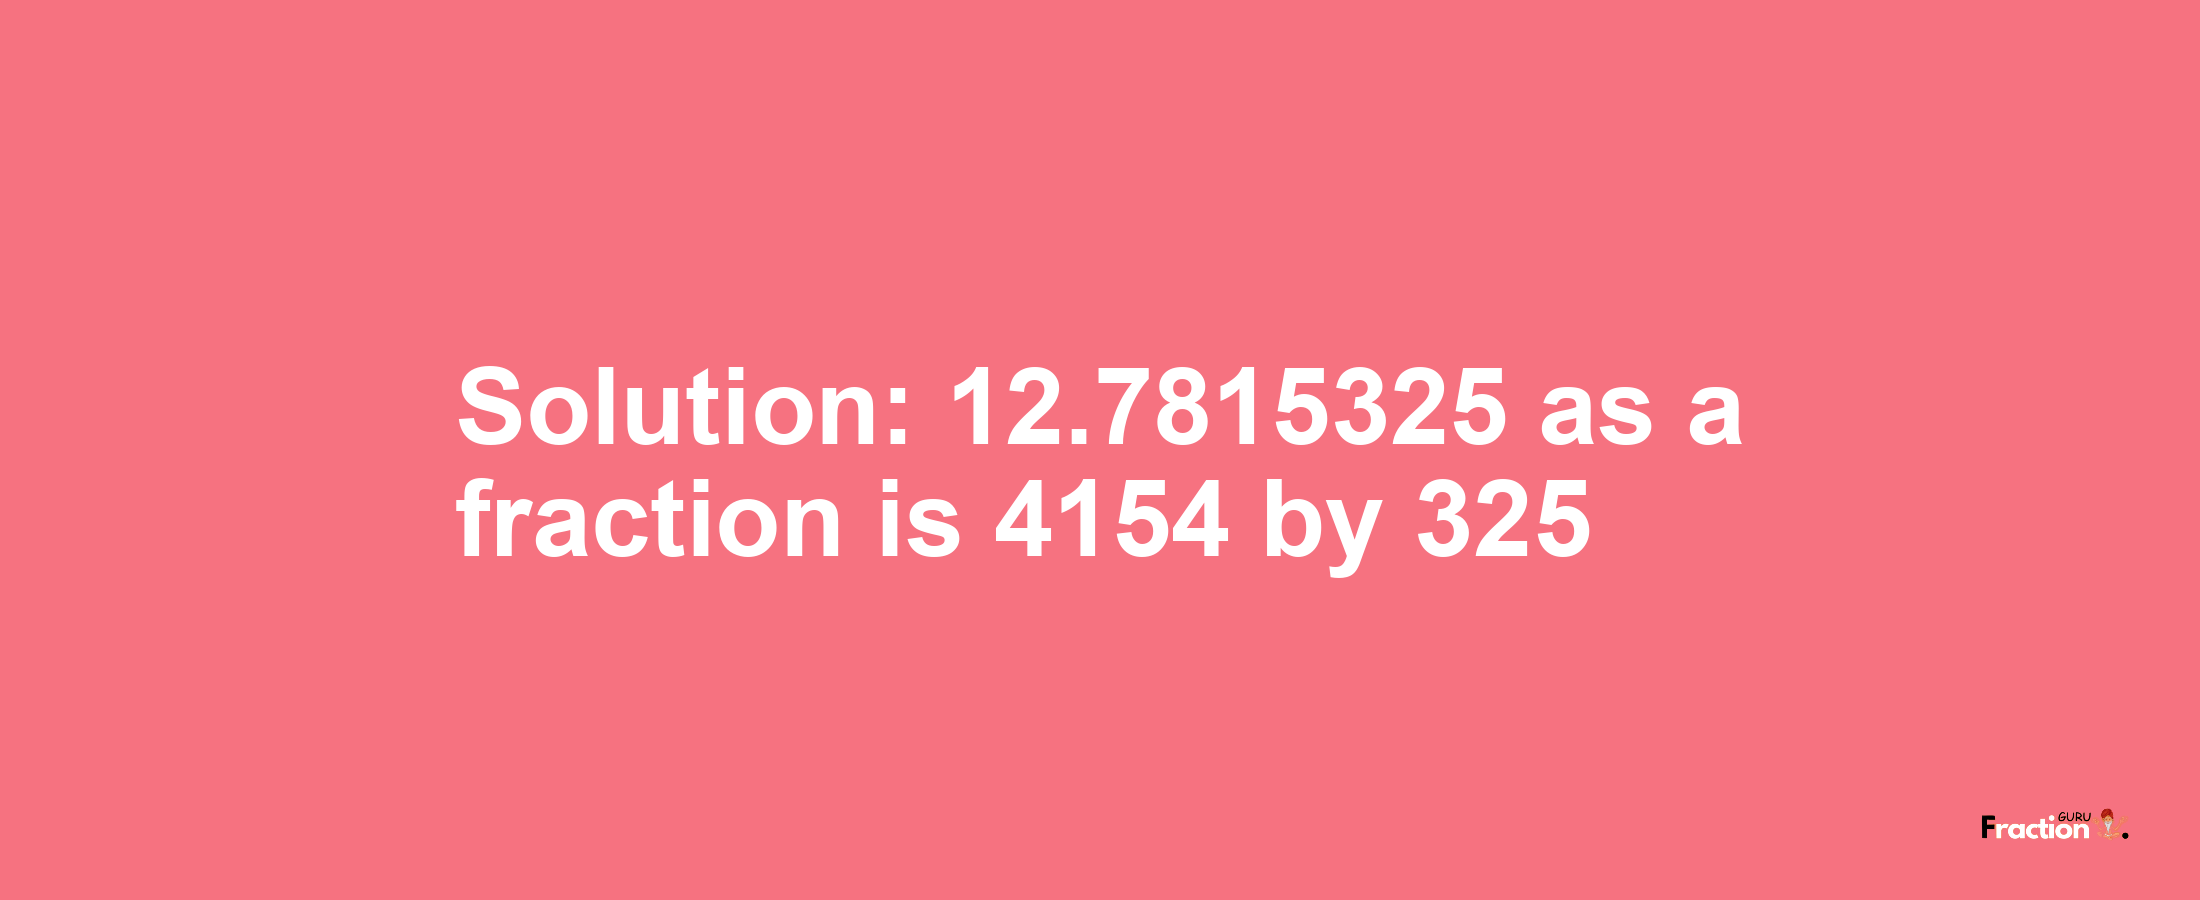 Solution:12.7815325 as a fraction is 4154/325